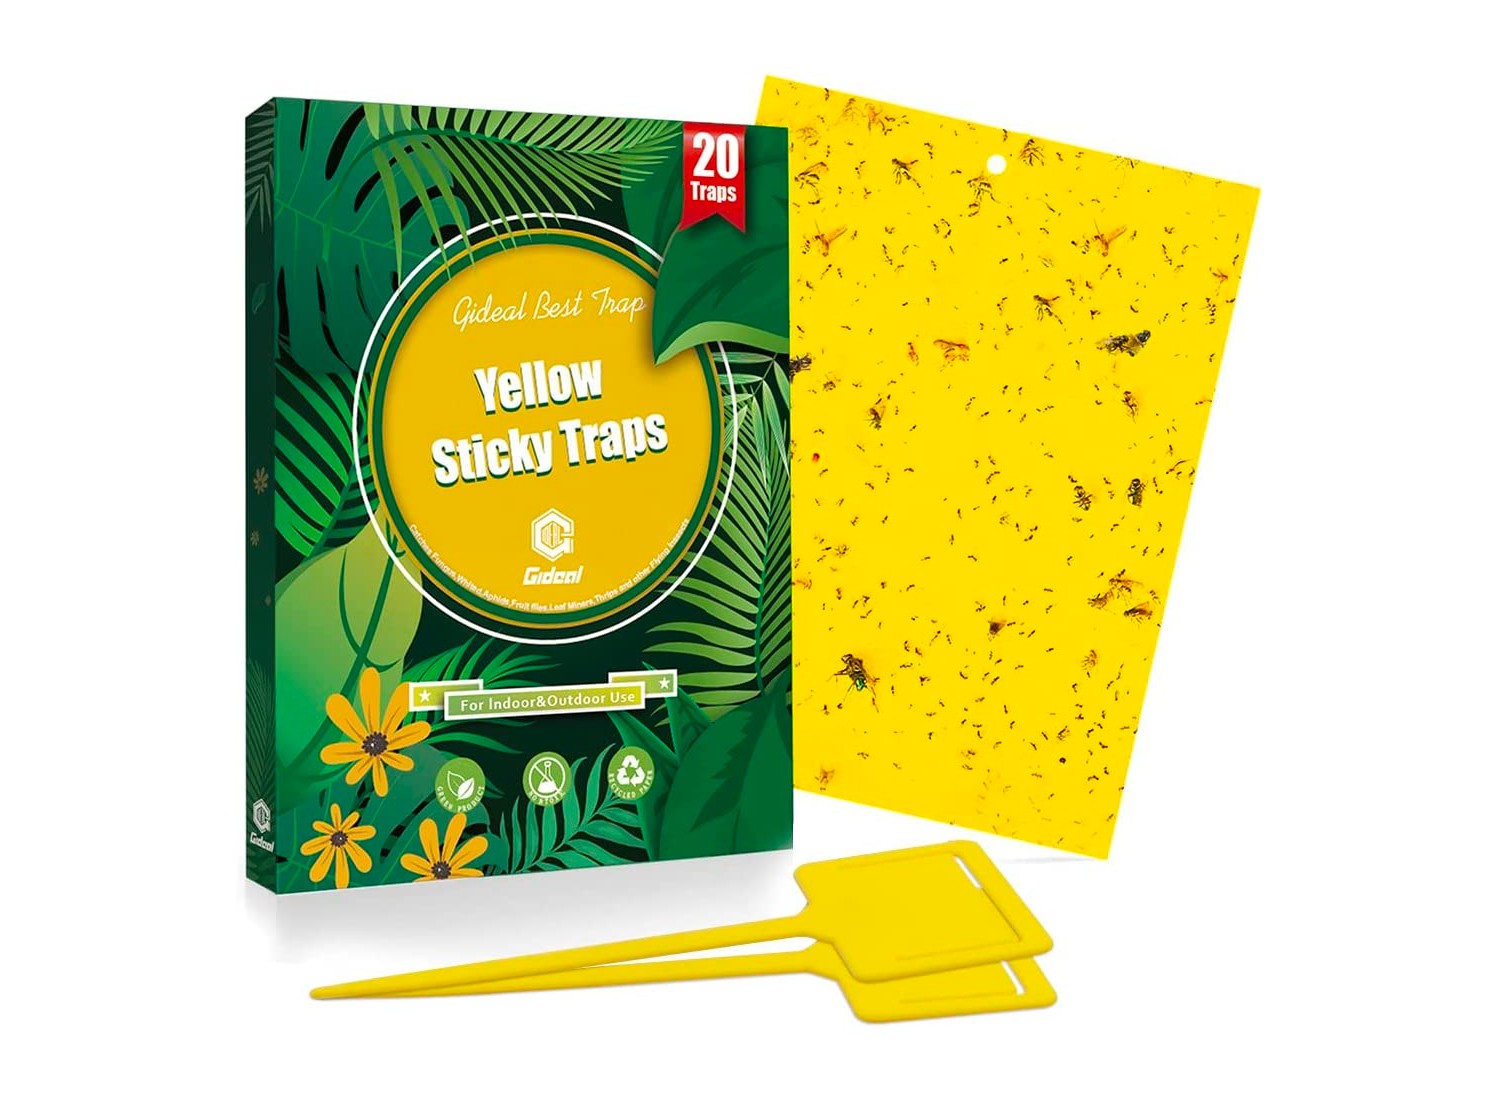 Sticky Trap,Fruit Fly and Gnat Trap Yellow Sticky Bug Traps for Indoor/Outdoor  Use - Insect Catcher for White Flies,Mosquitos,Fungus Gnats,Flying Insects  - Disposable Glue Trappers (30 pcs) 